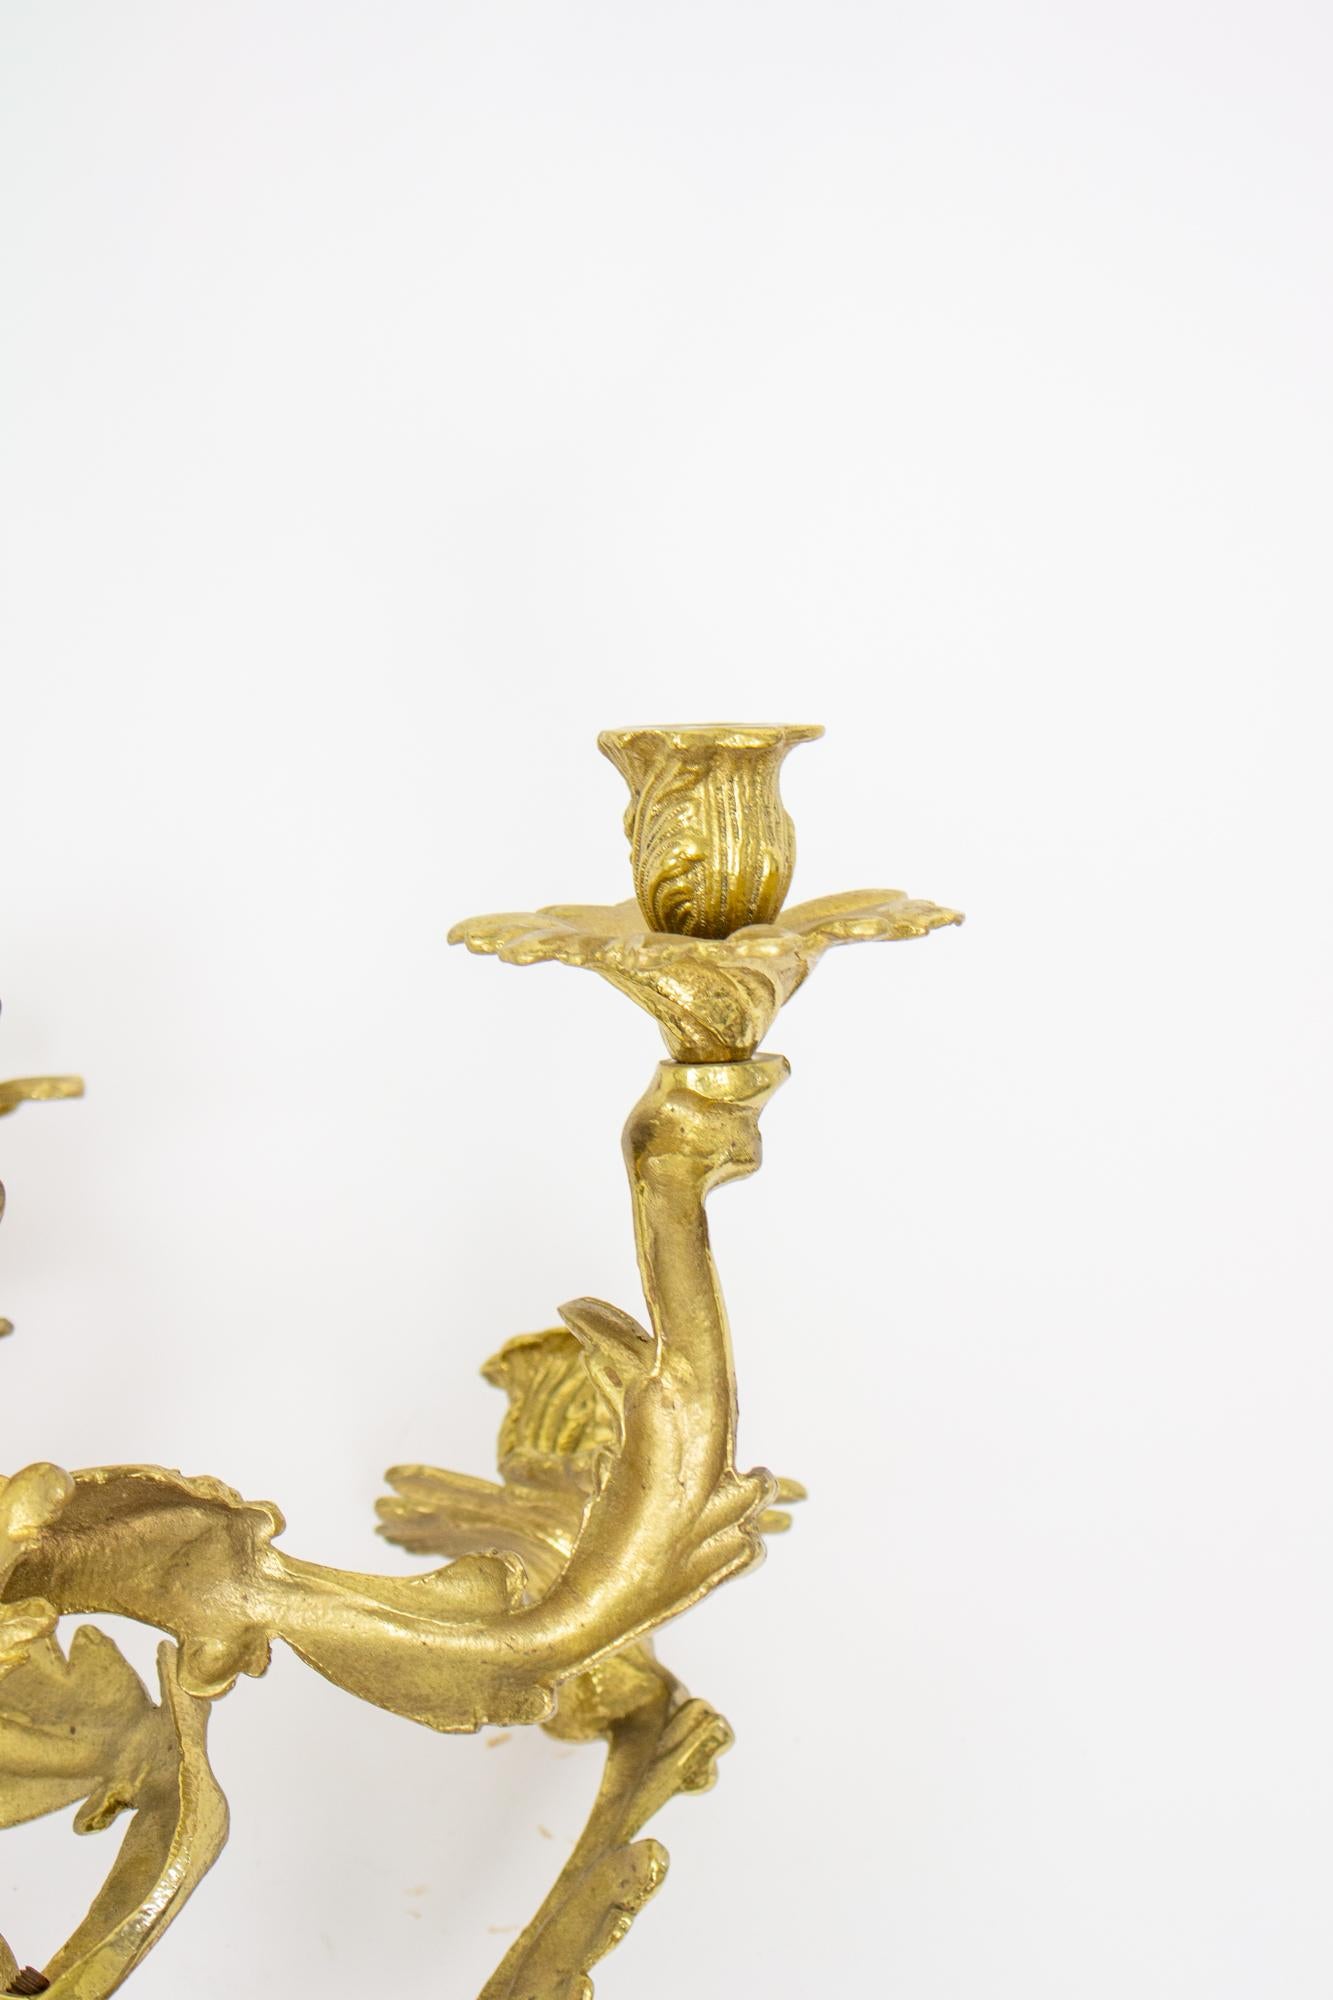 American S392 Mid 20th Century Brass Louis XV Style Sconces - a Pair For Sale